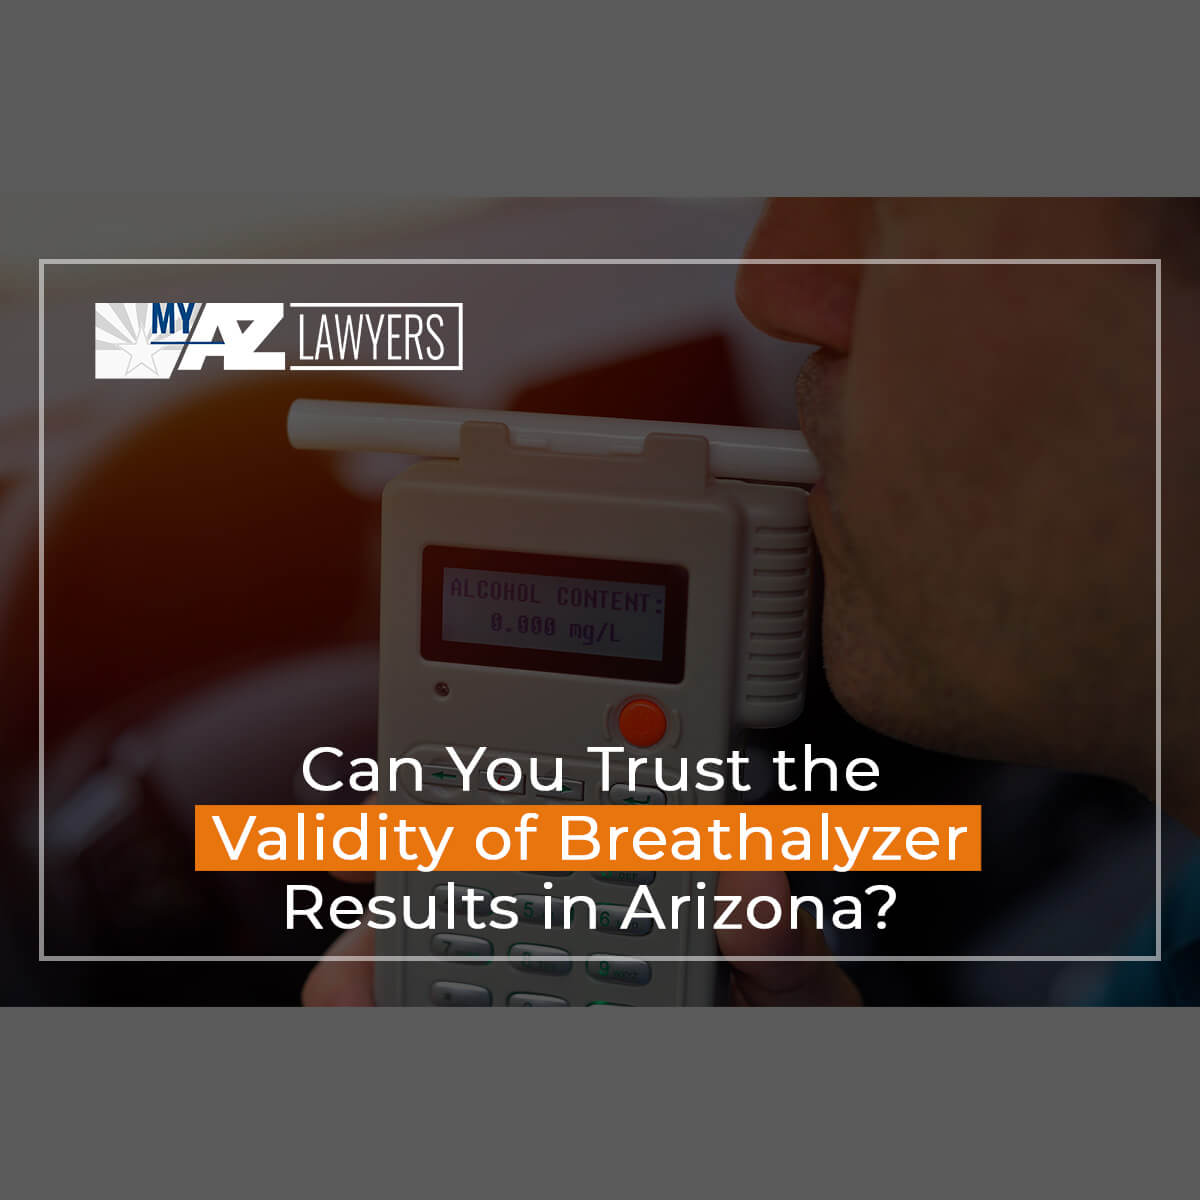 Can You Trust the Validity of Breathalyzer Results in Arizona?